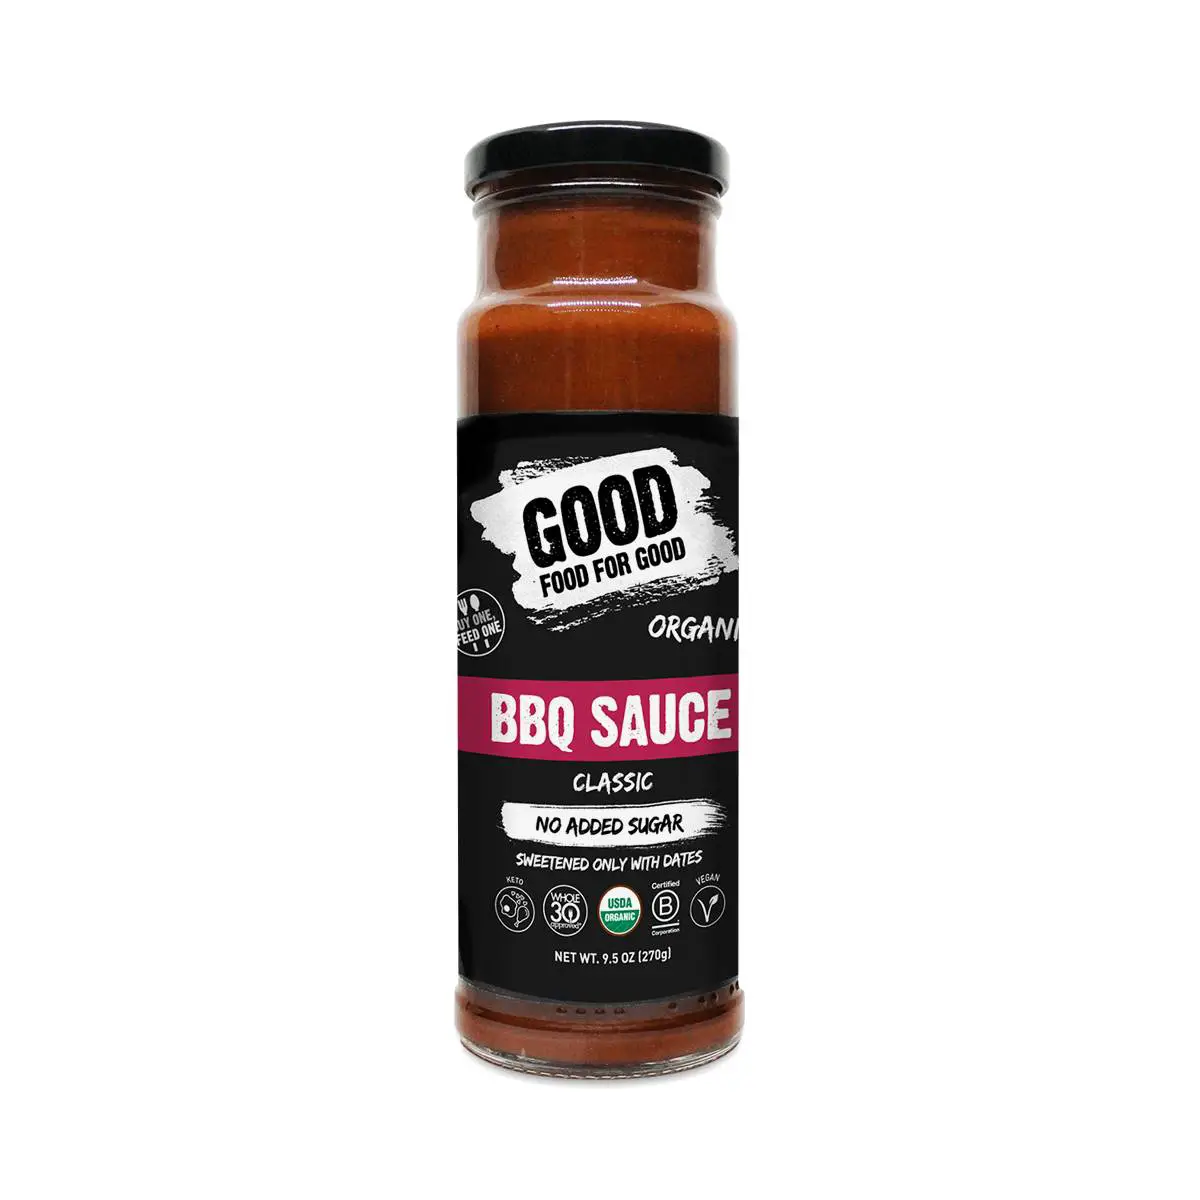 Classic BBQ Sauce by Good Food for Good